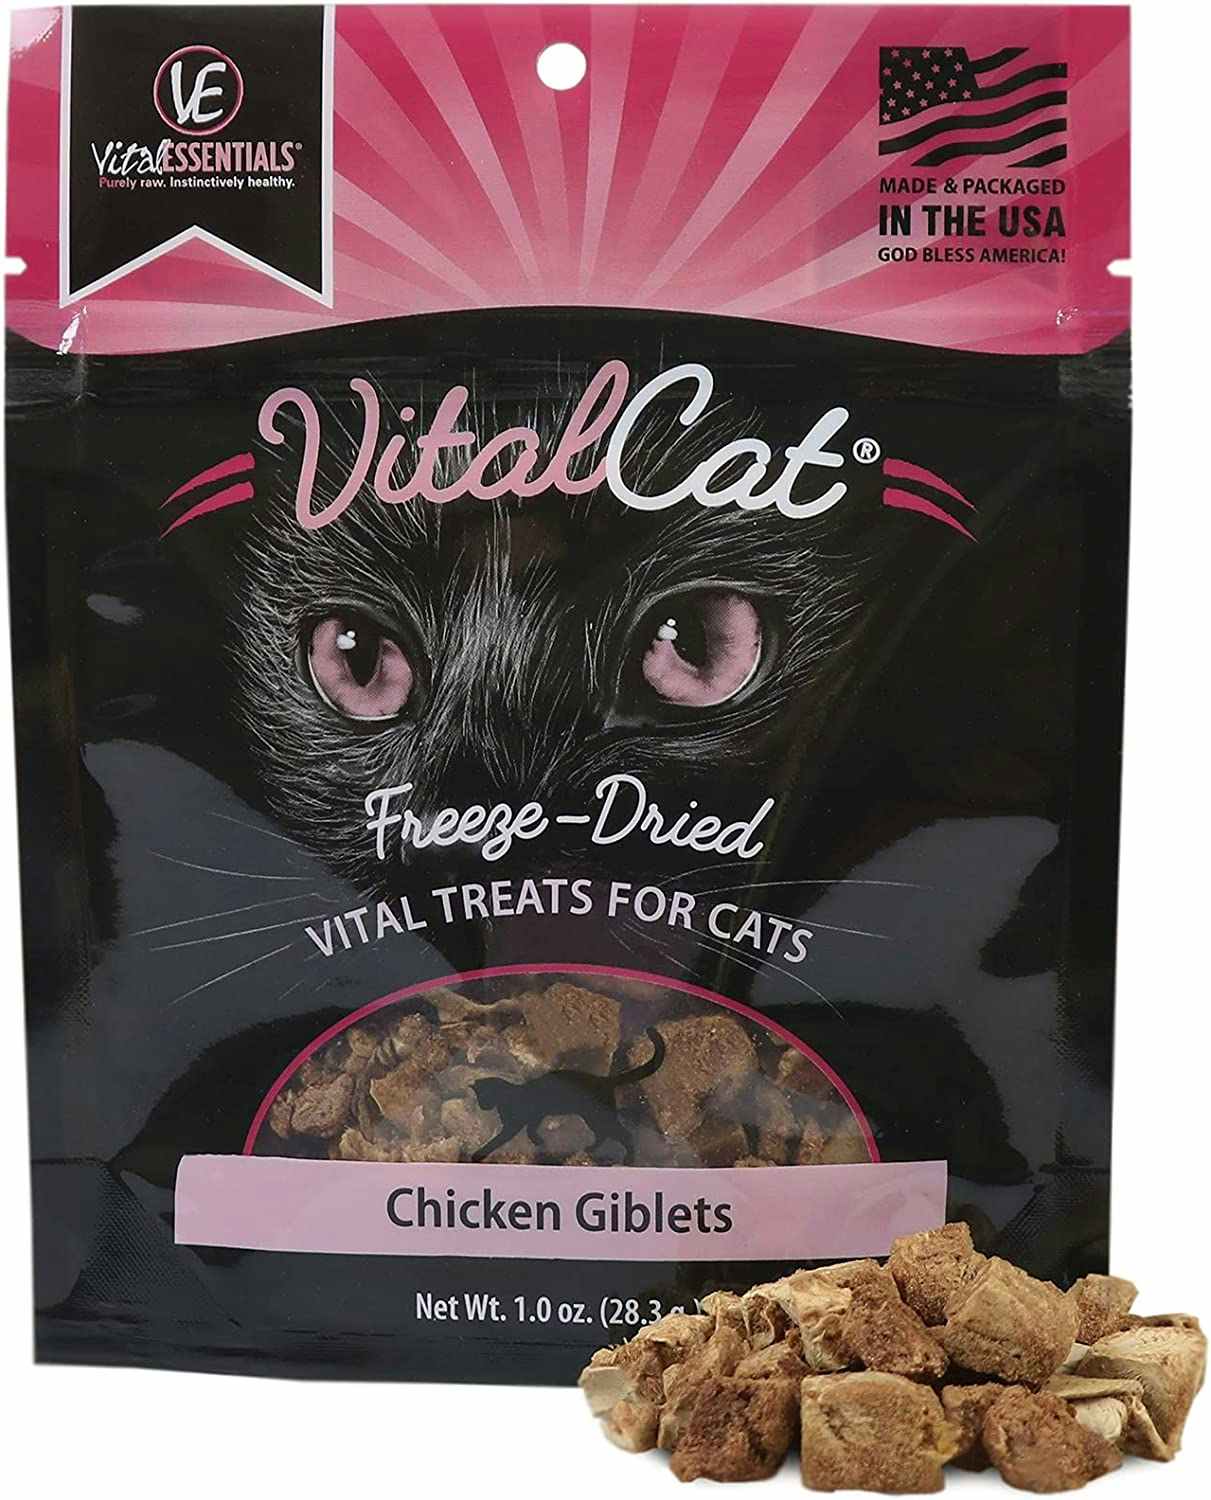 A bag of cat treats on a white background.